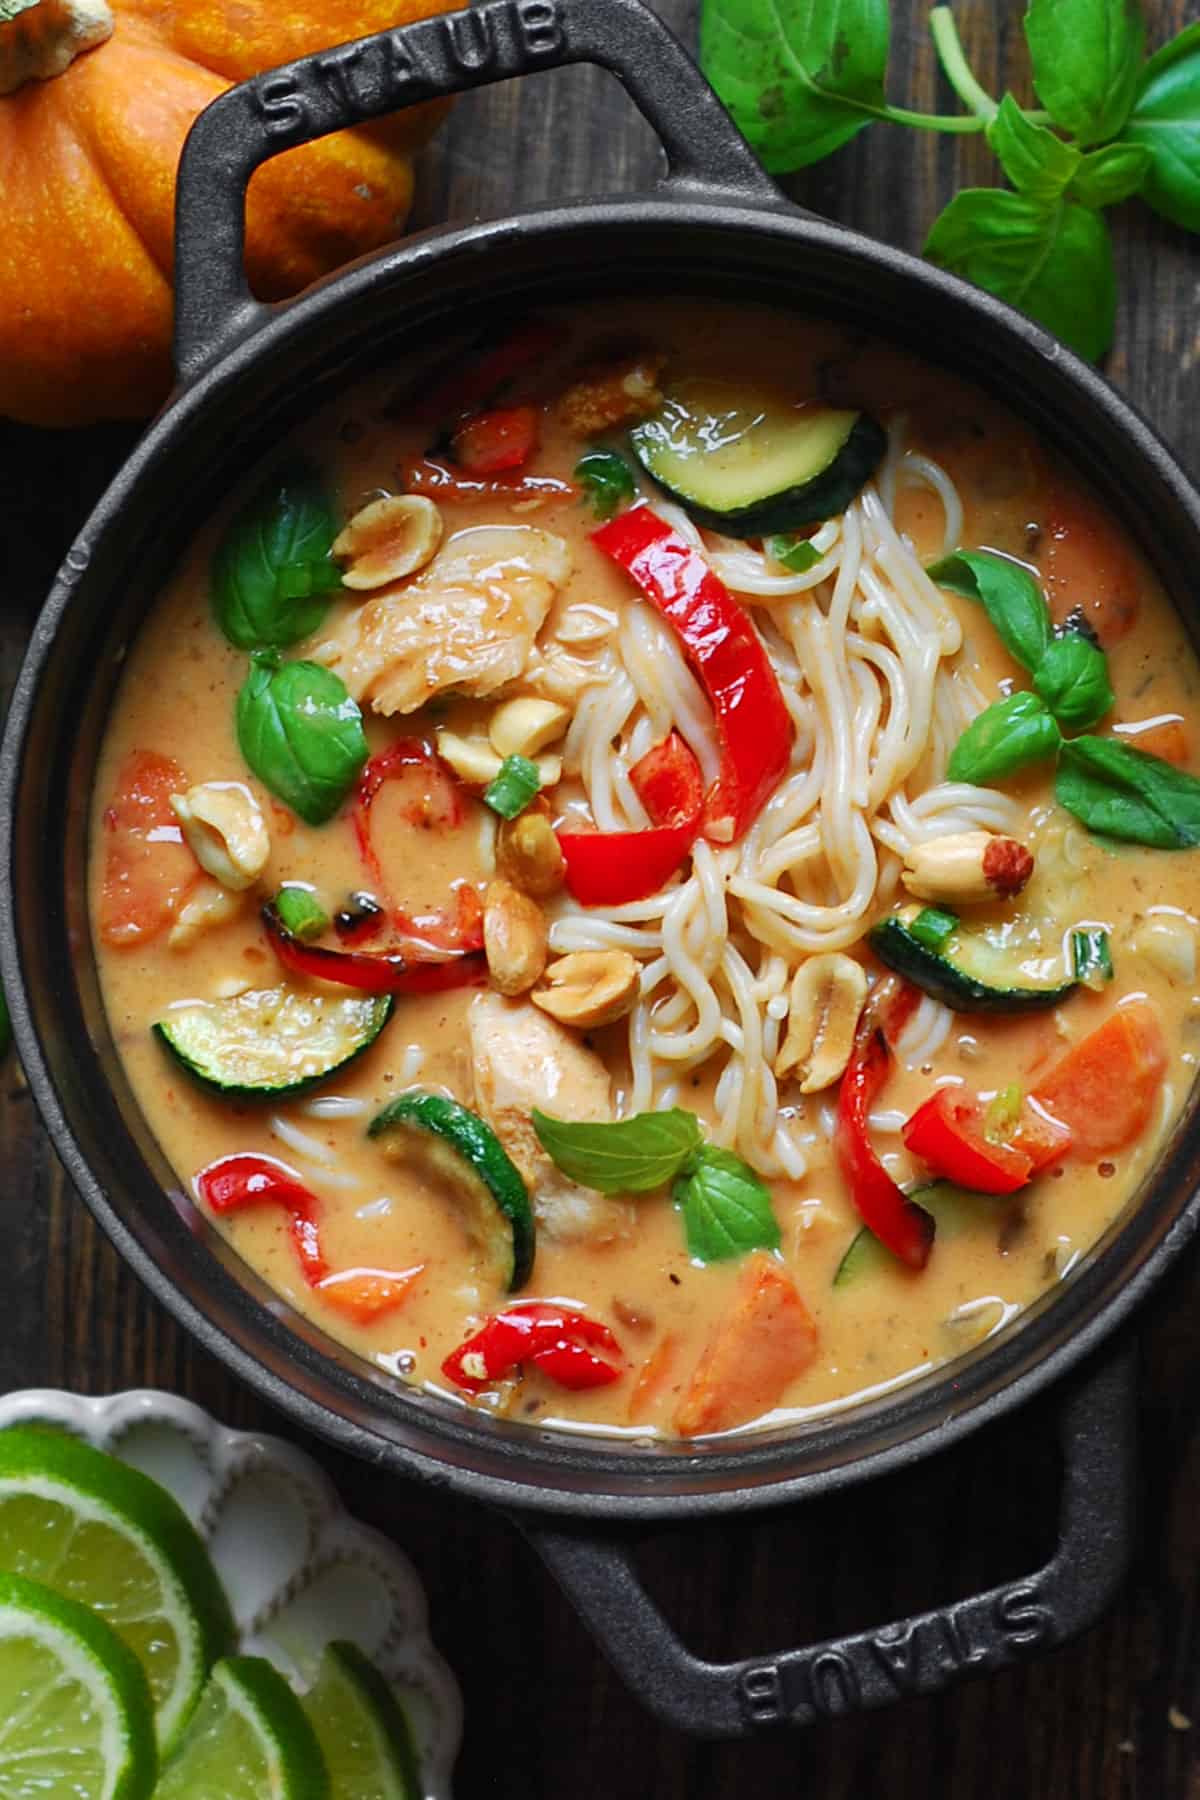 Thai-inspired Red Curry Noodle Soup with chicken, coconut broth, lime juice, red bell peppers, zucchini, carrots, and peanuts - in a cast iron soup pan.